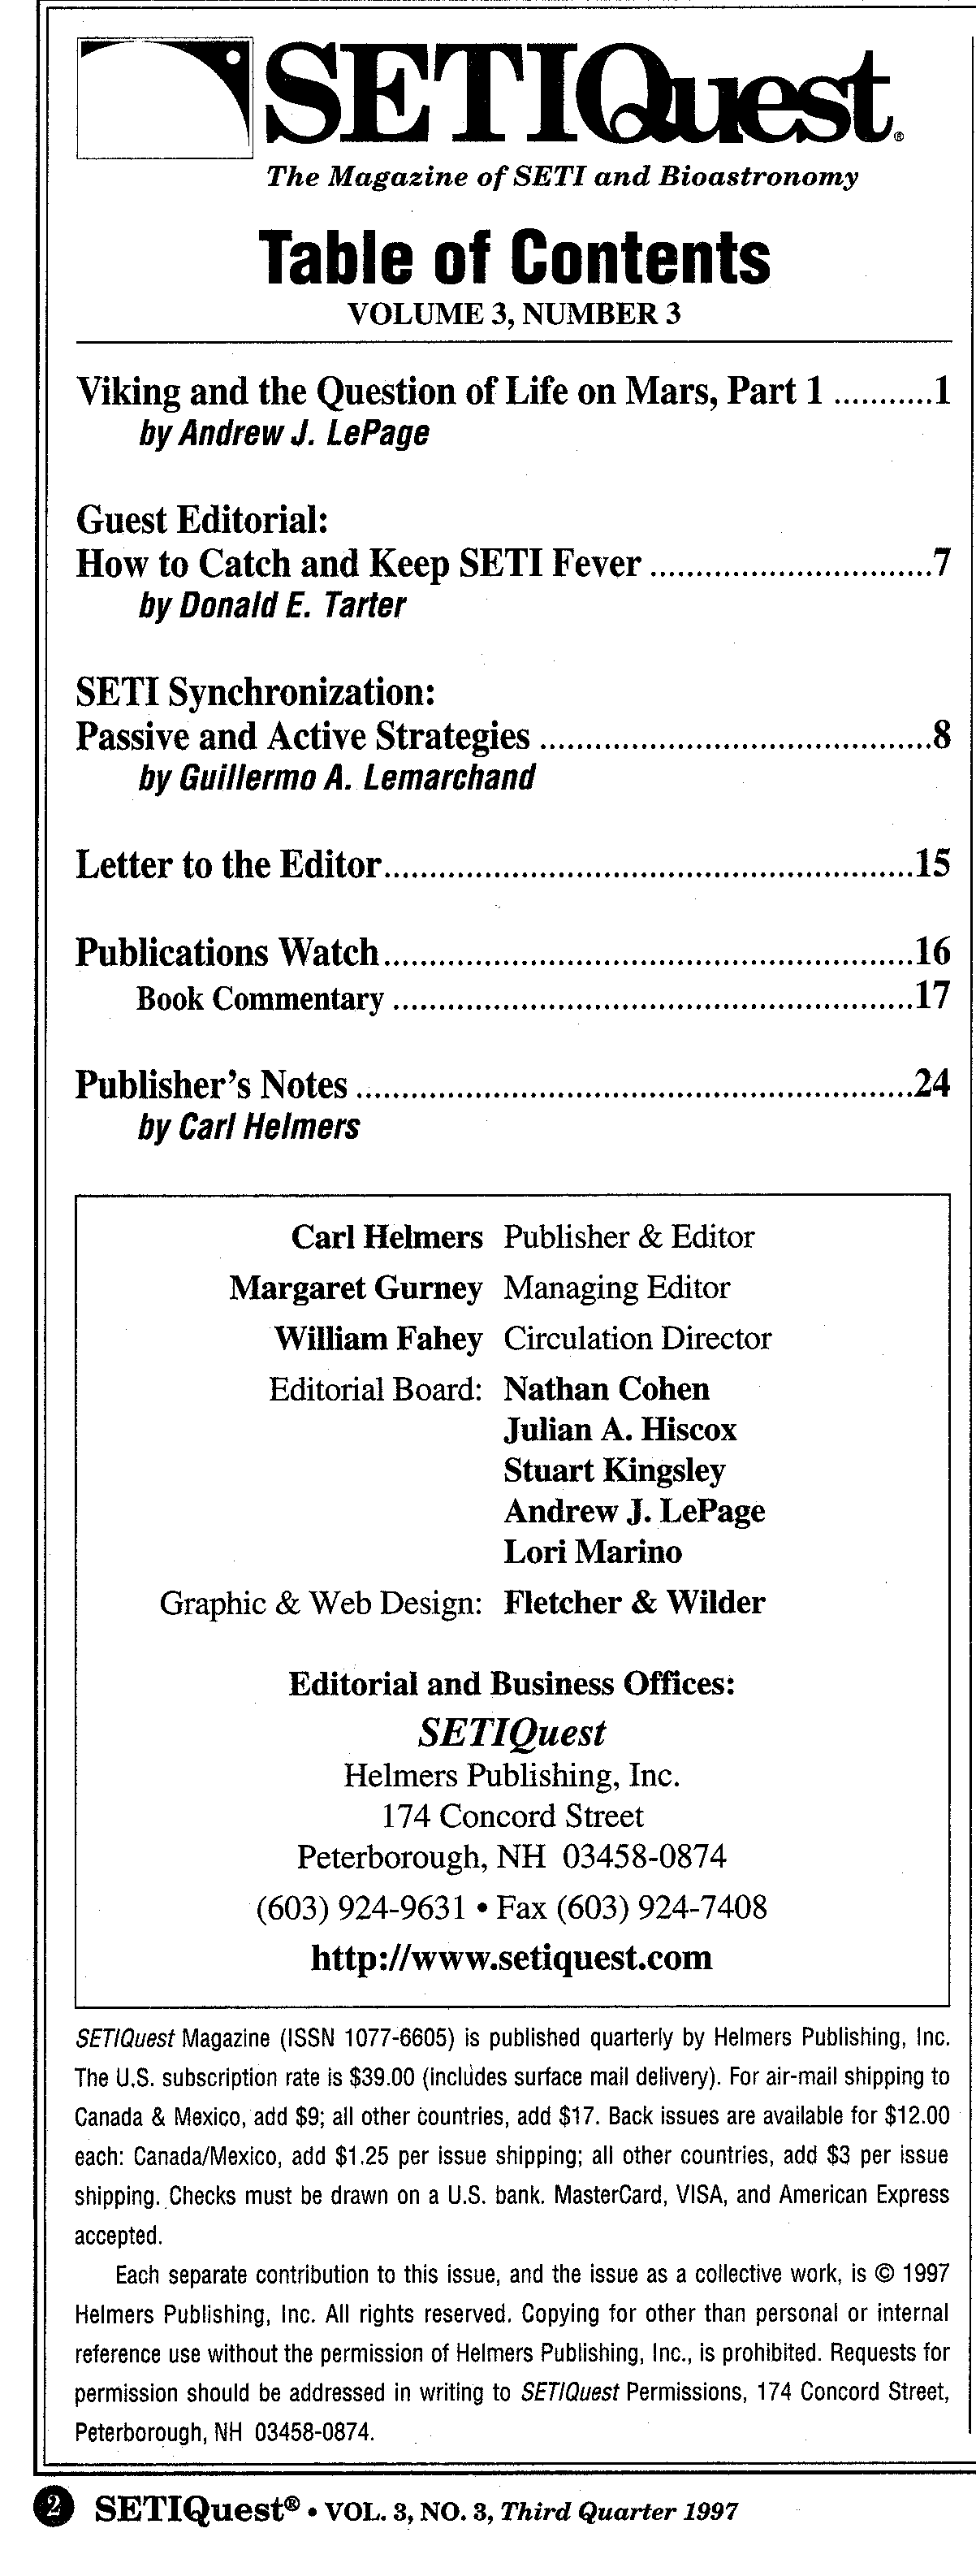 SETIQuest, Volume 3, Number 3 - Table of Contents